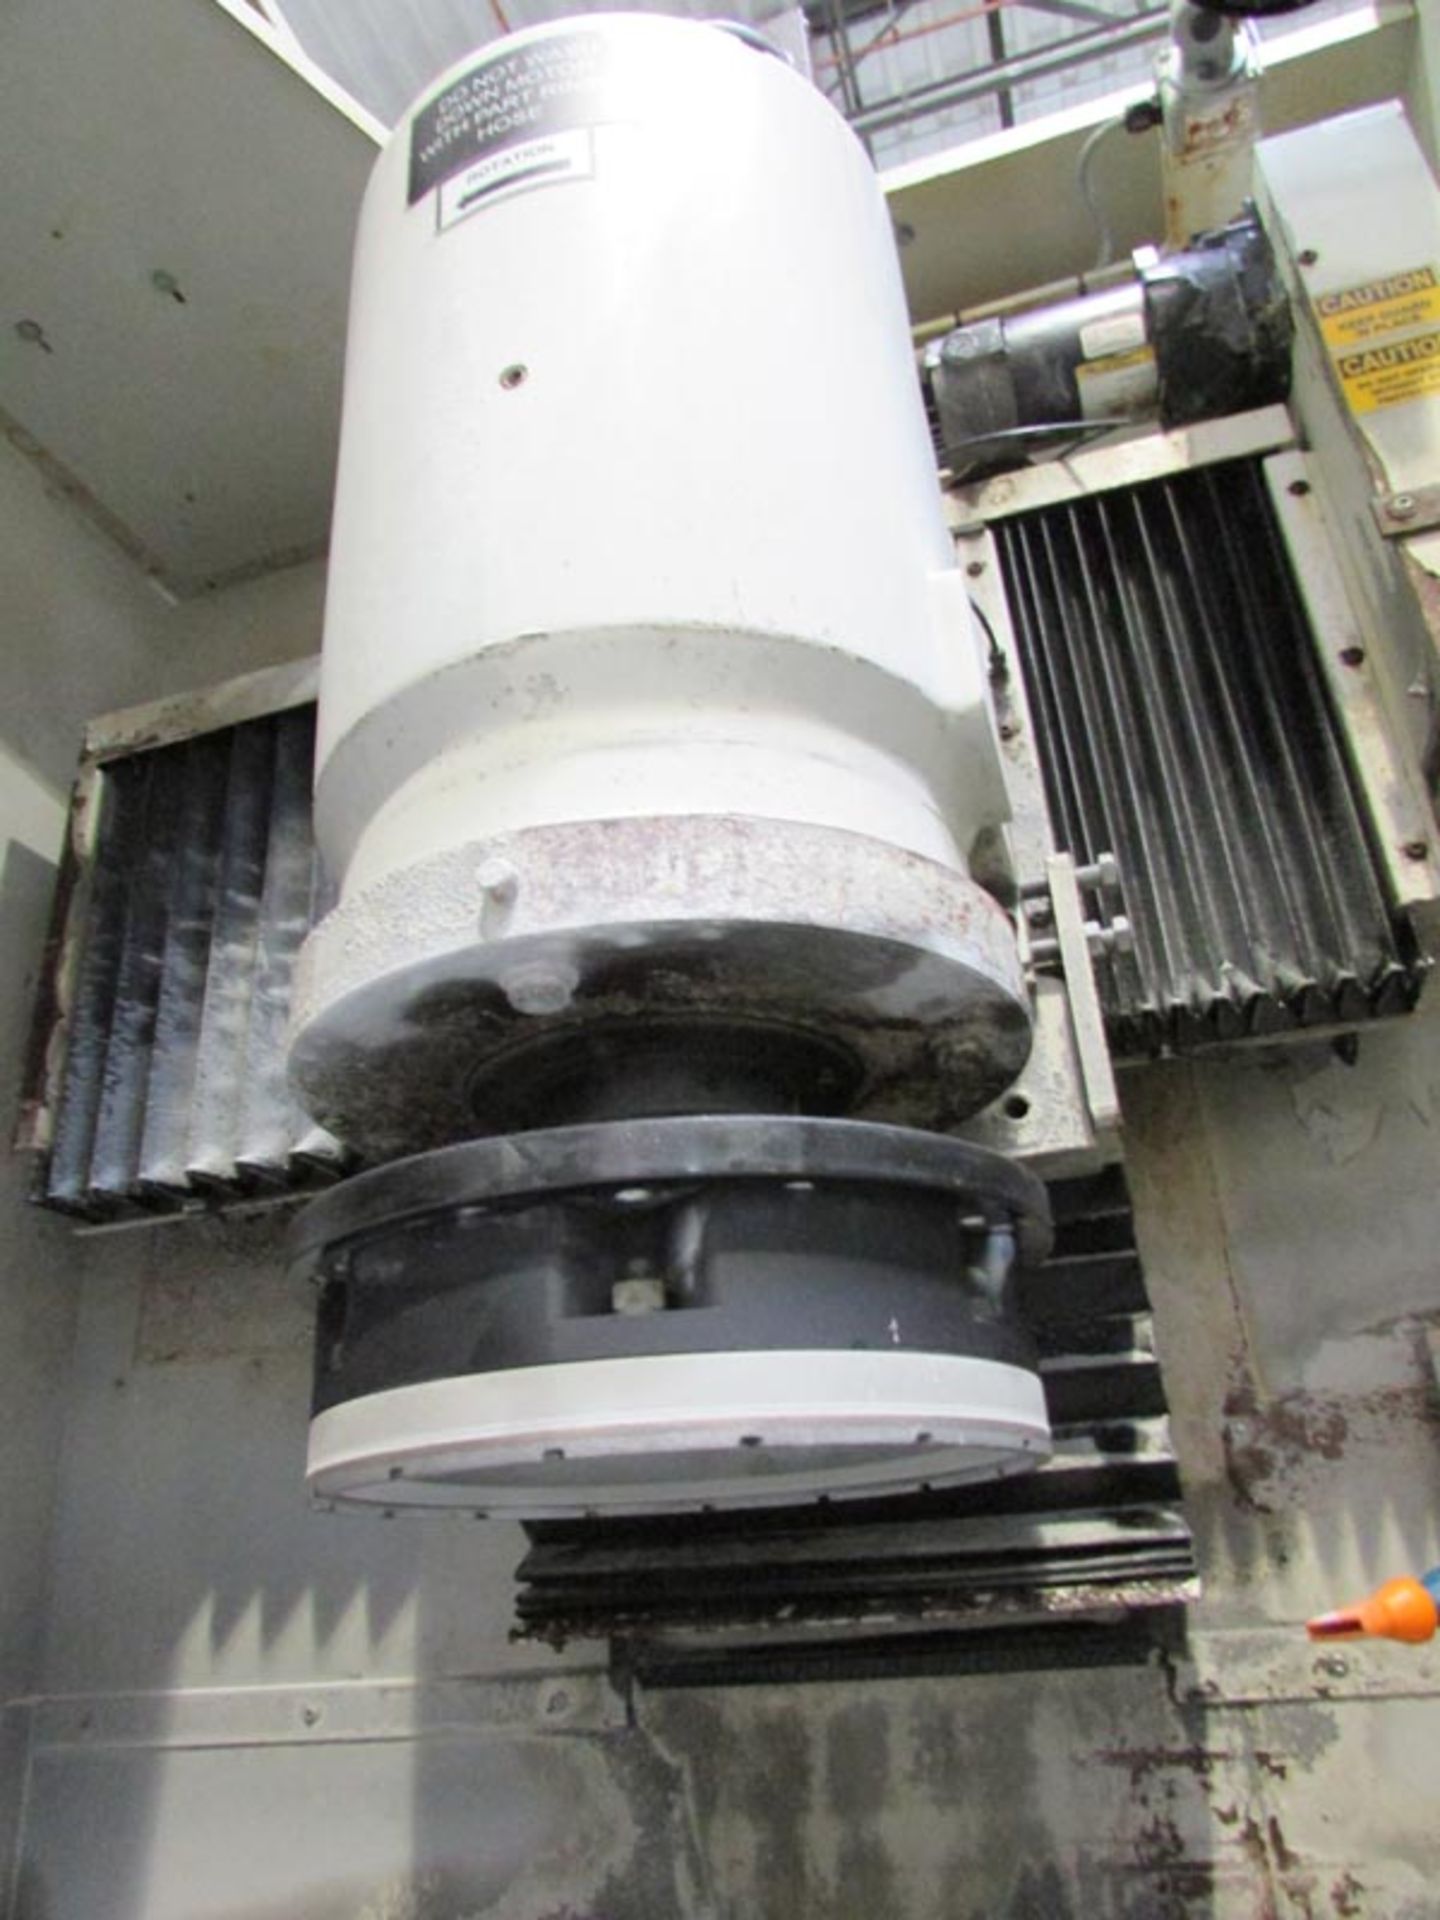 2011 DCM Mdl: IG280 SD Rotary Surface Grinder 18'' Magnetic Chuck, 12'' Grinding Wheel - Image 4 of 8